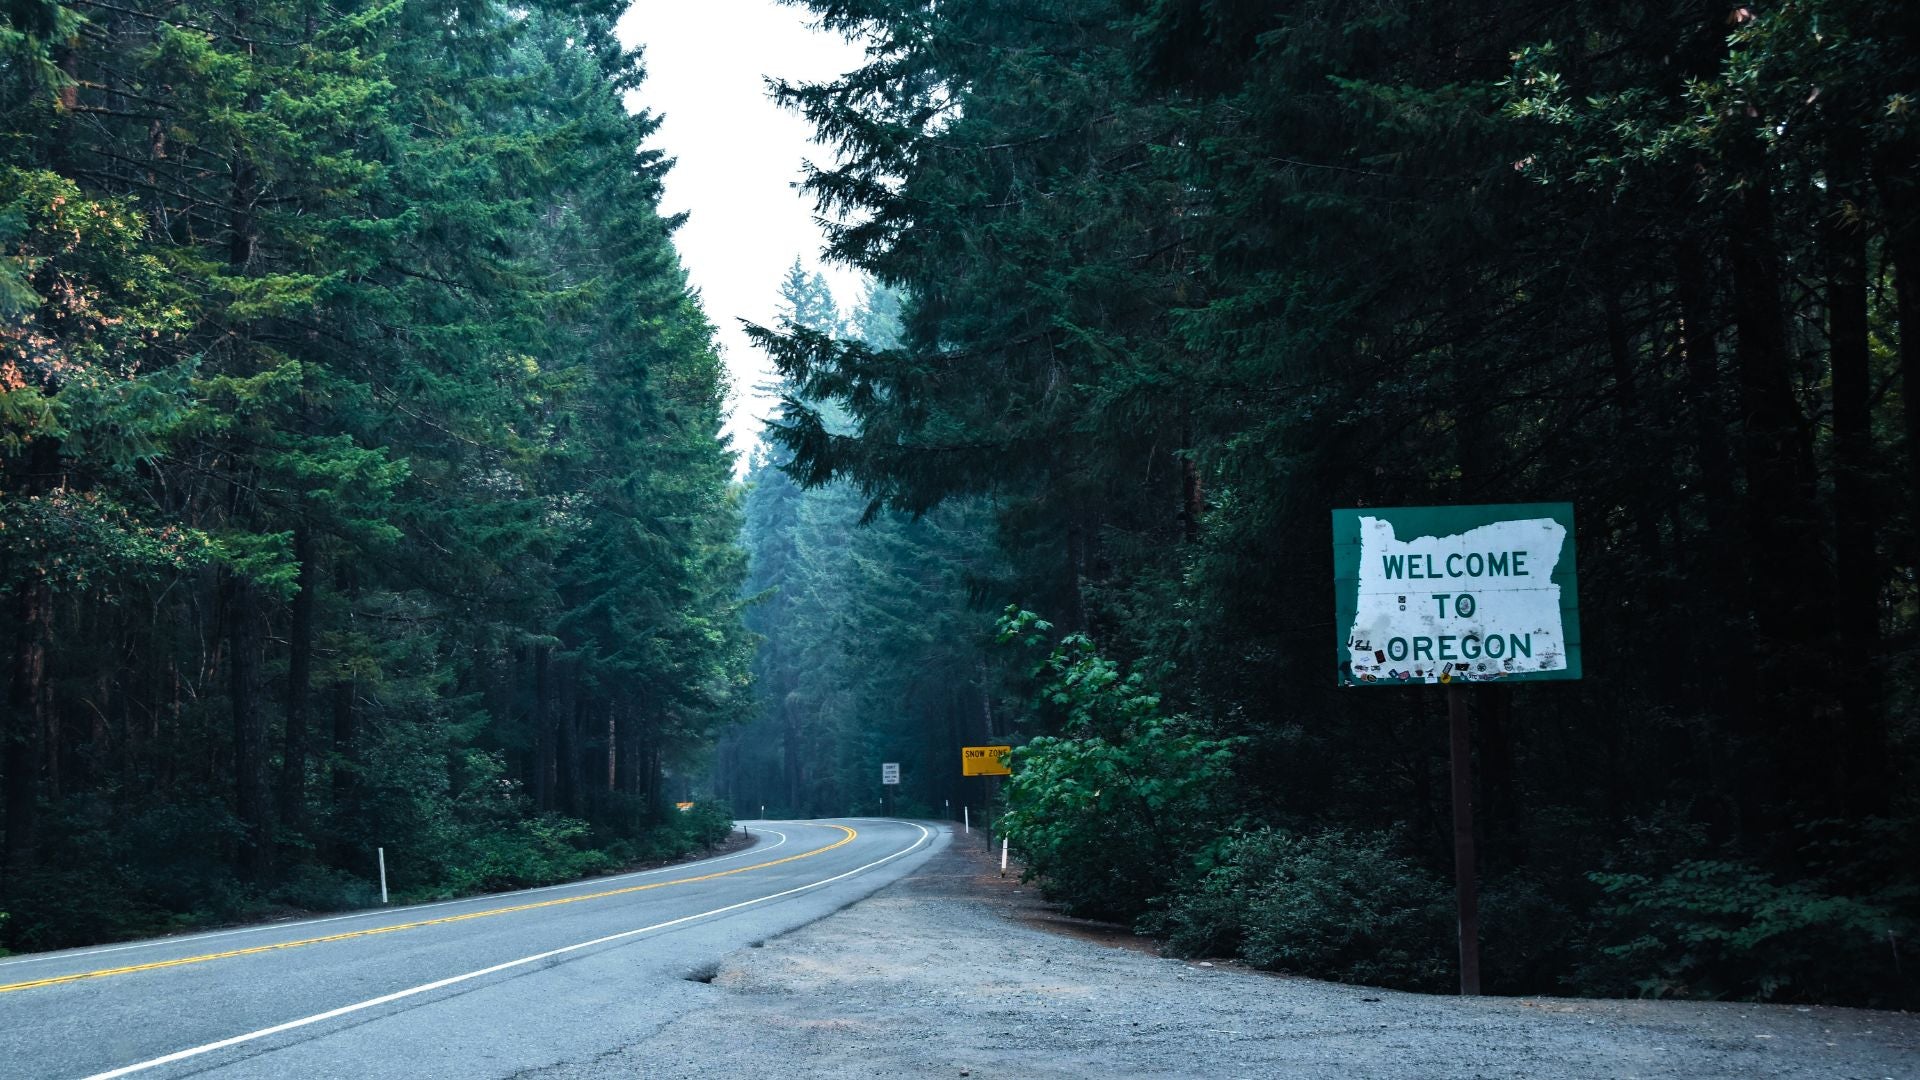 A "Welcome to Oregon" sign beside the road surrounded by trees. - History By Mail